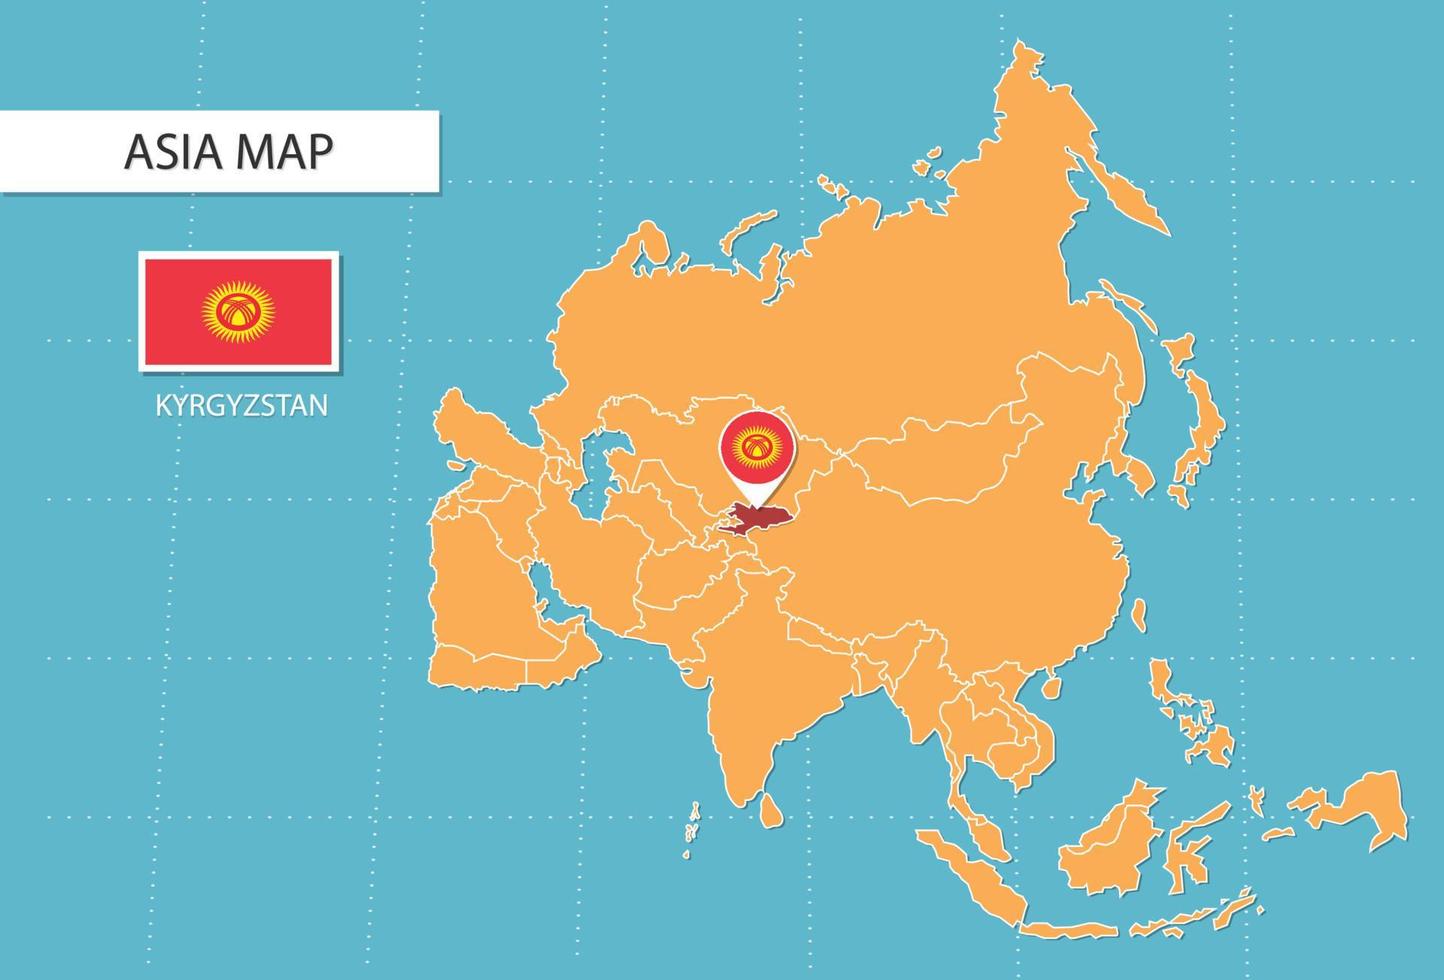 Kyrgyzstan map in Asia, icons showing Kyrgyzstan location and flags. vector